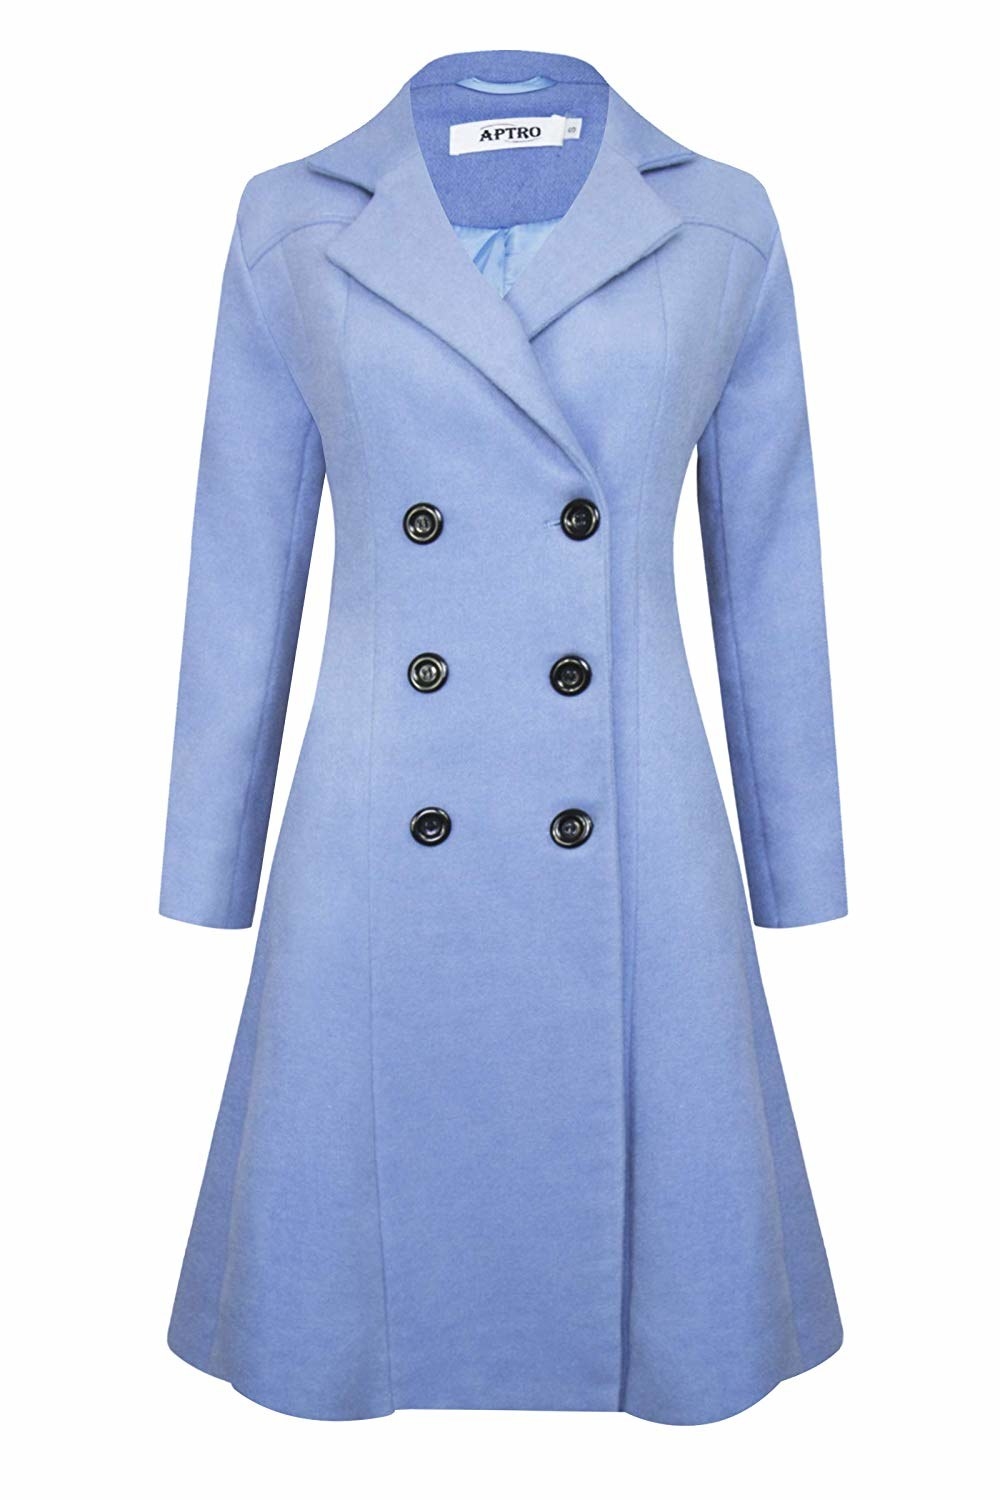 28 Colorful Coats To Brighten Up Your Winter Look